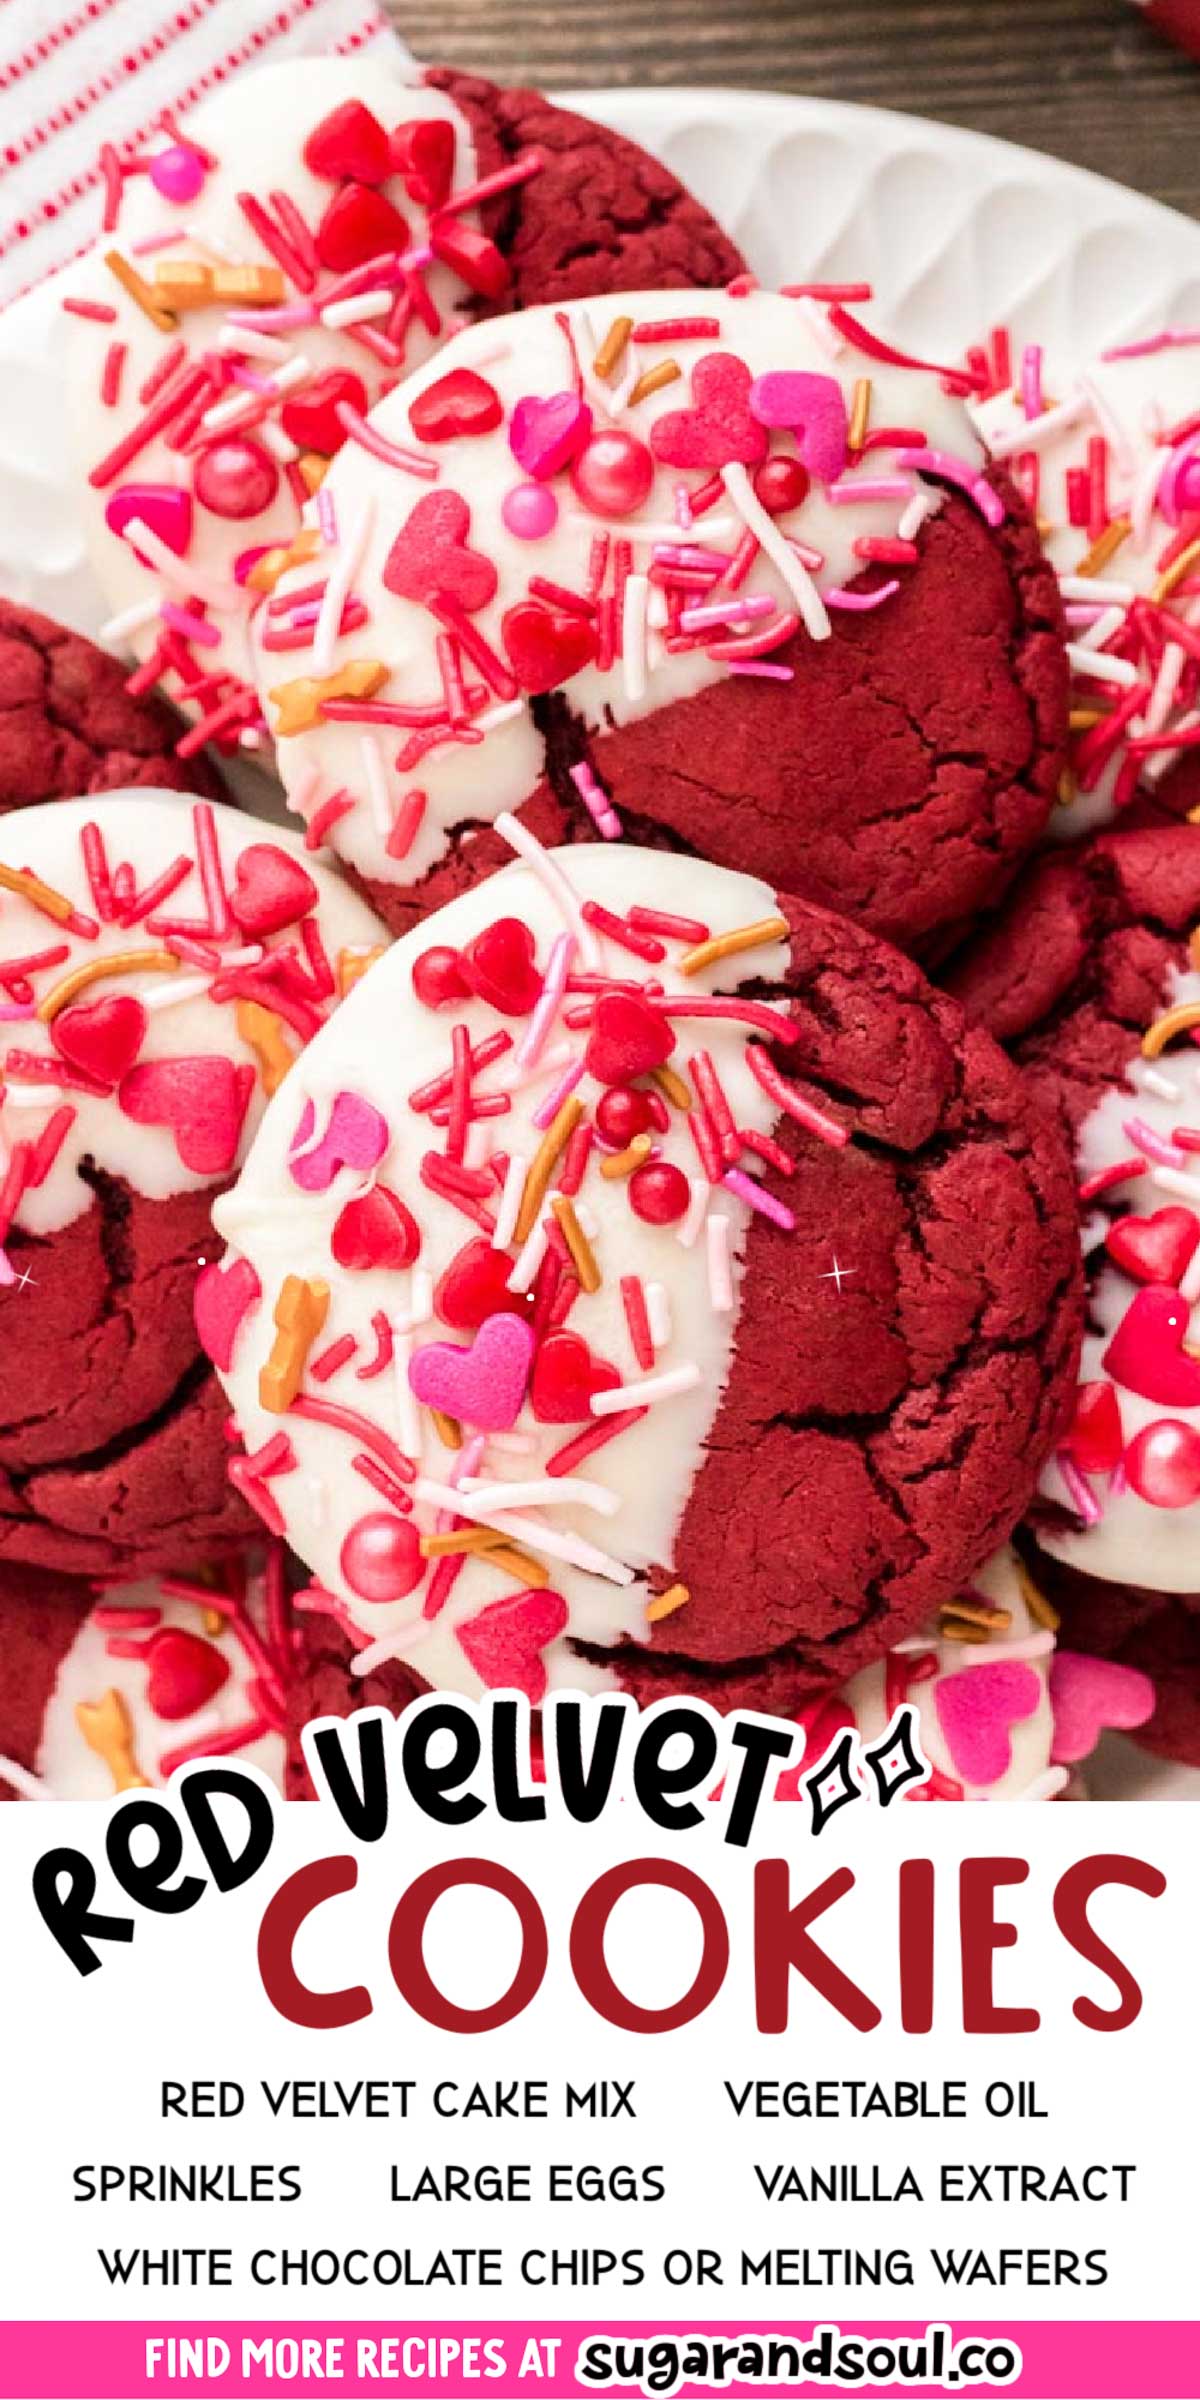 Valentine's Day Red Velvet Cookies are an easy-to-make dessert with a boxed cake mix base that are decorated with chocolate and sprinkles! Whip up two dozen cookies in under an hour to share with all of your loved ones! via @sugarandsoulco